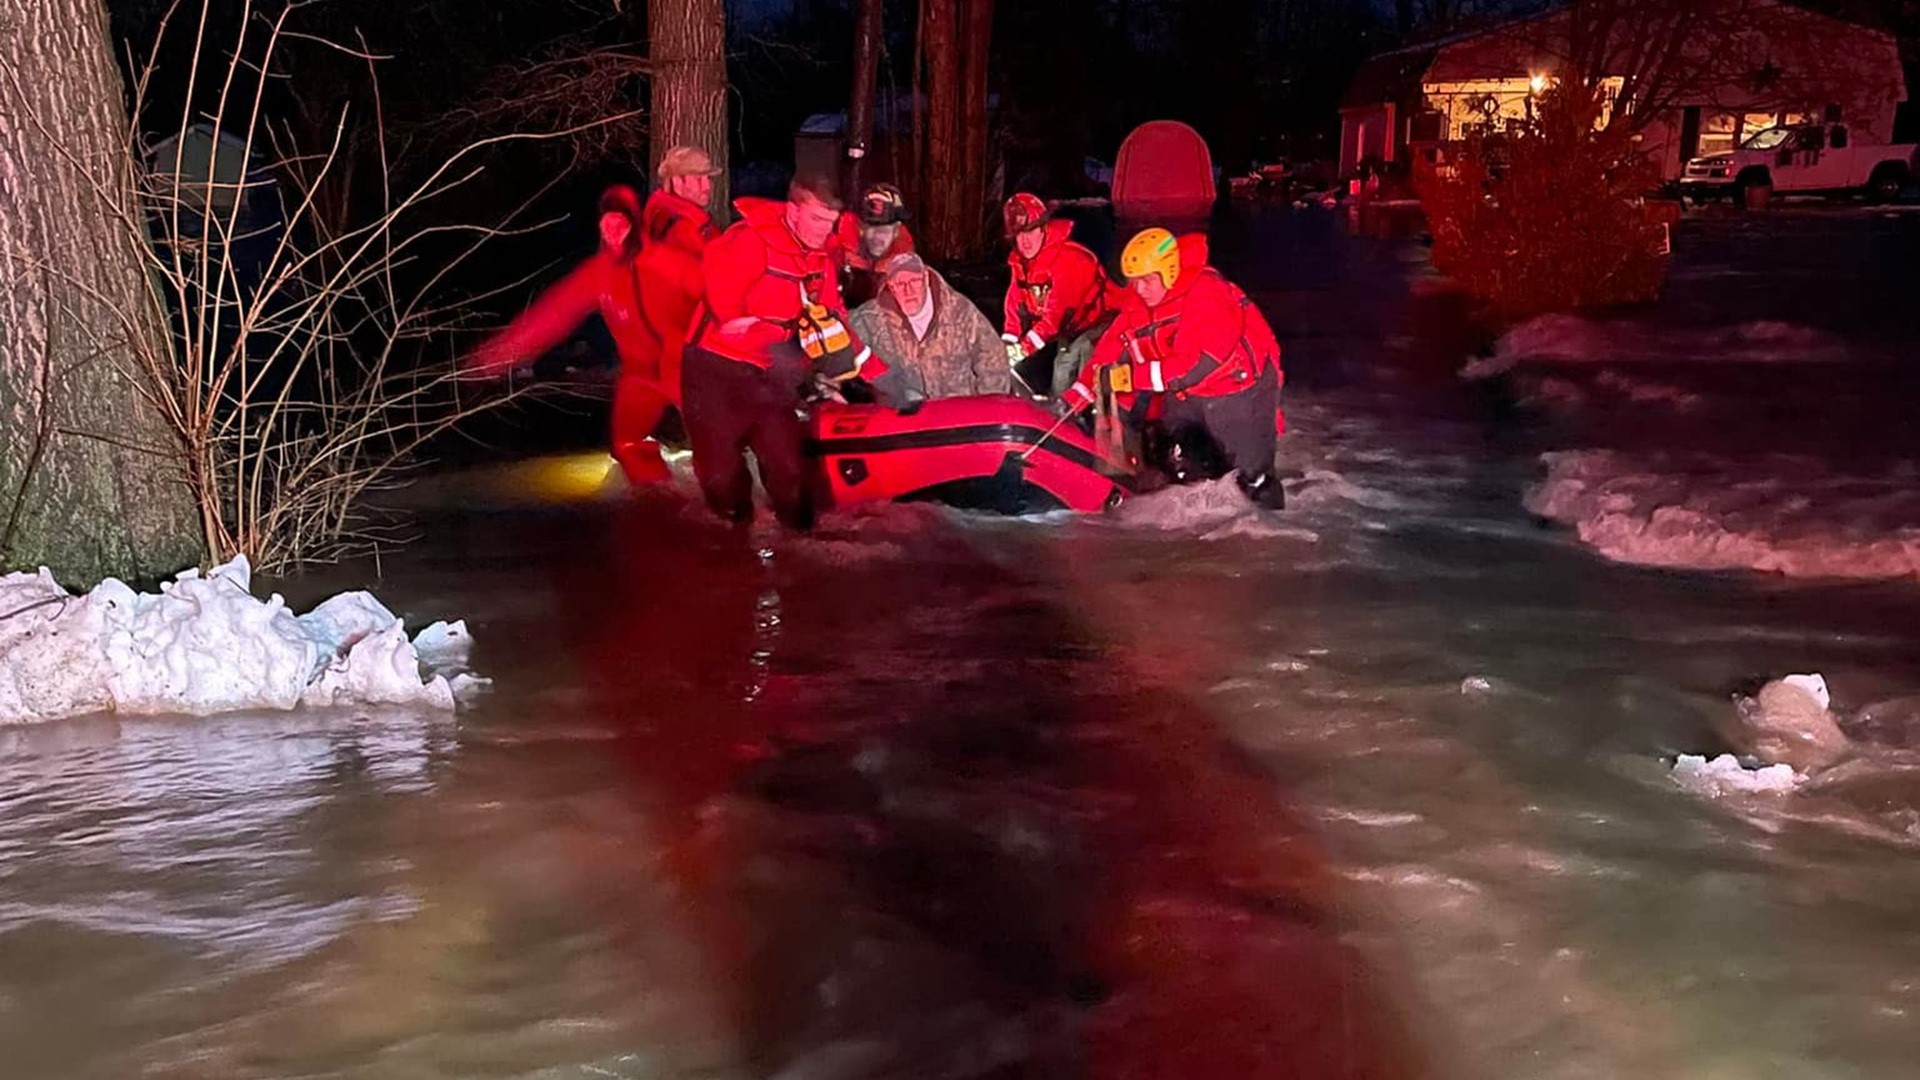 Hose company rescue teams saved people from rising waters early Friday.